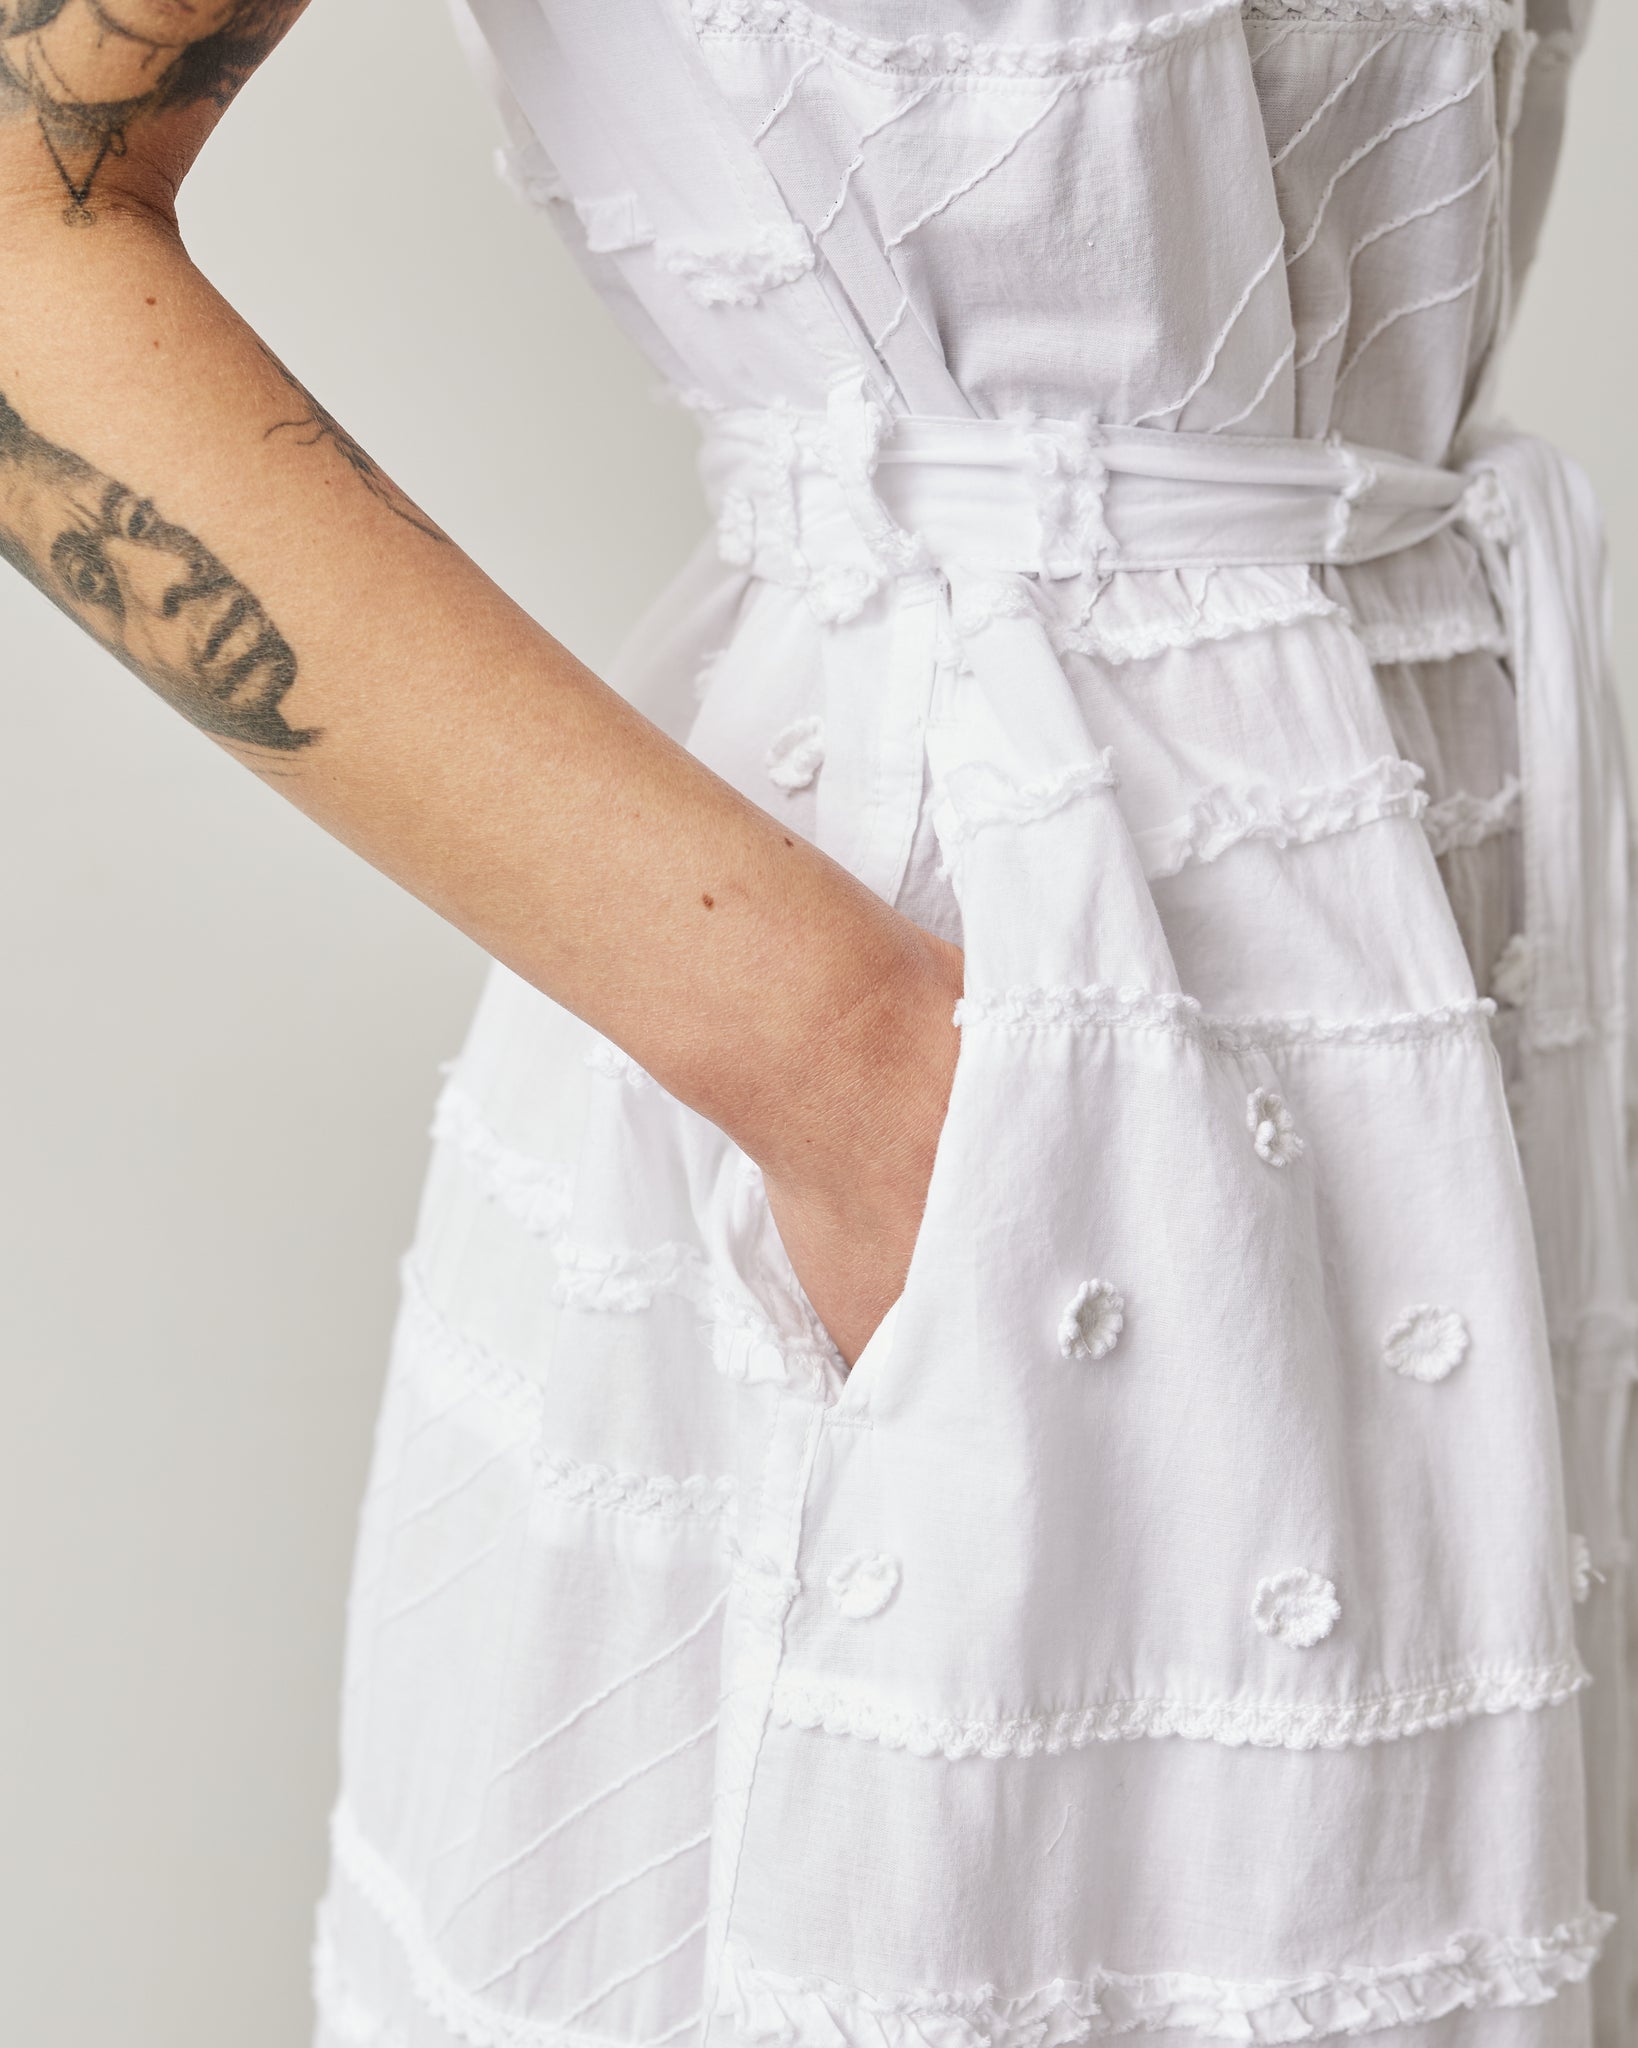 Engineered Garments Banded Collar Dress, White